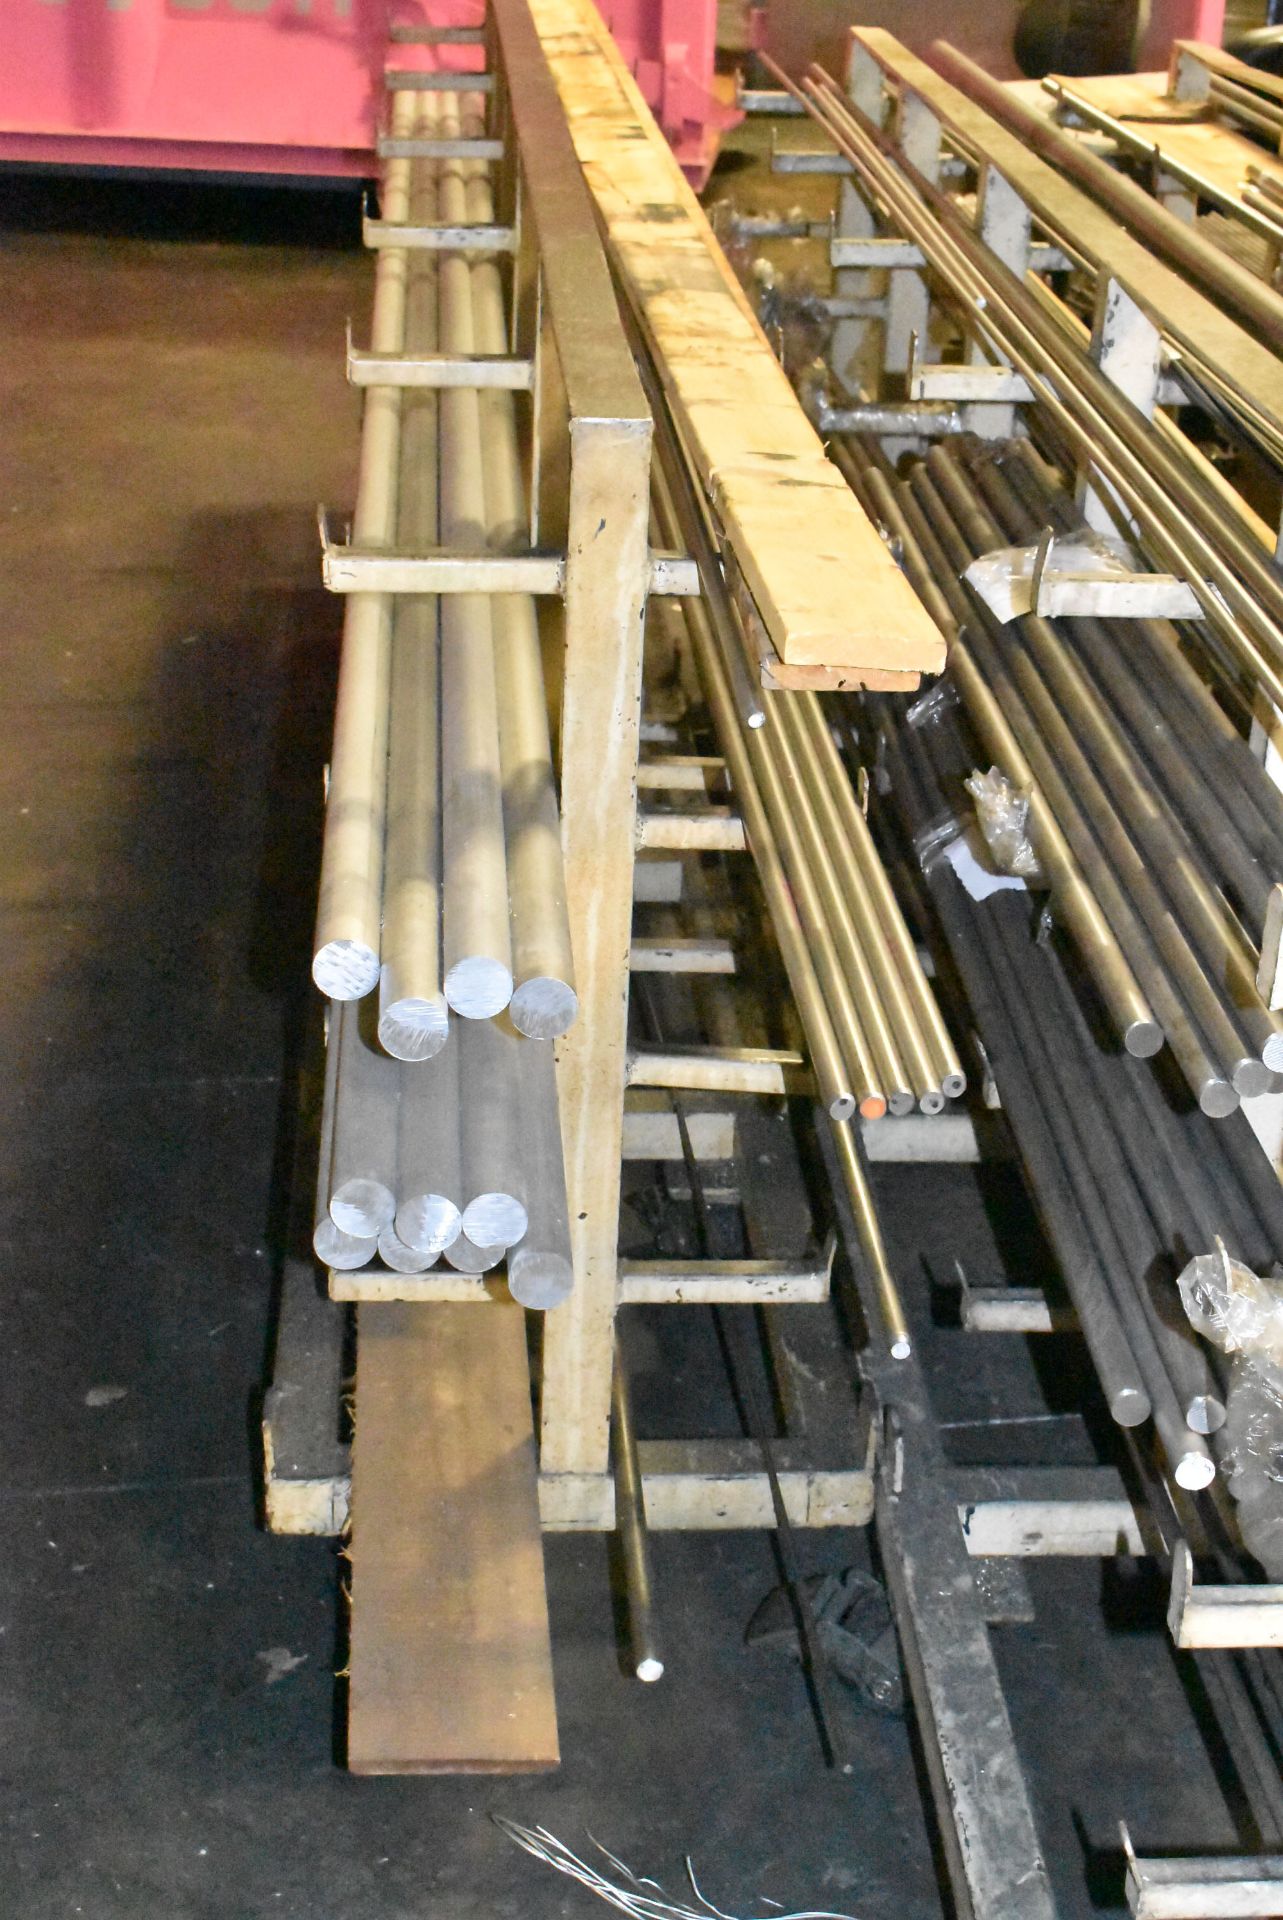 LOT/ CONTENTS OF (3) RACKS CONSISTING OF FERROUS AND NON-FERROUS BAR STOCK (RACKS NOT INCLUDED) - Image 2 of 5